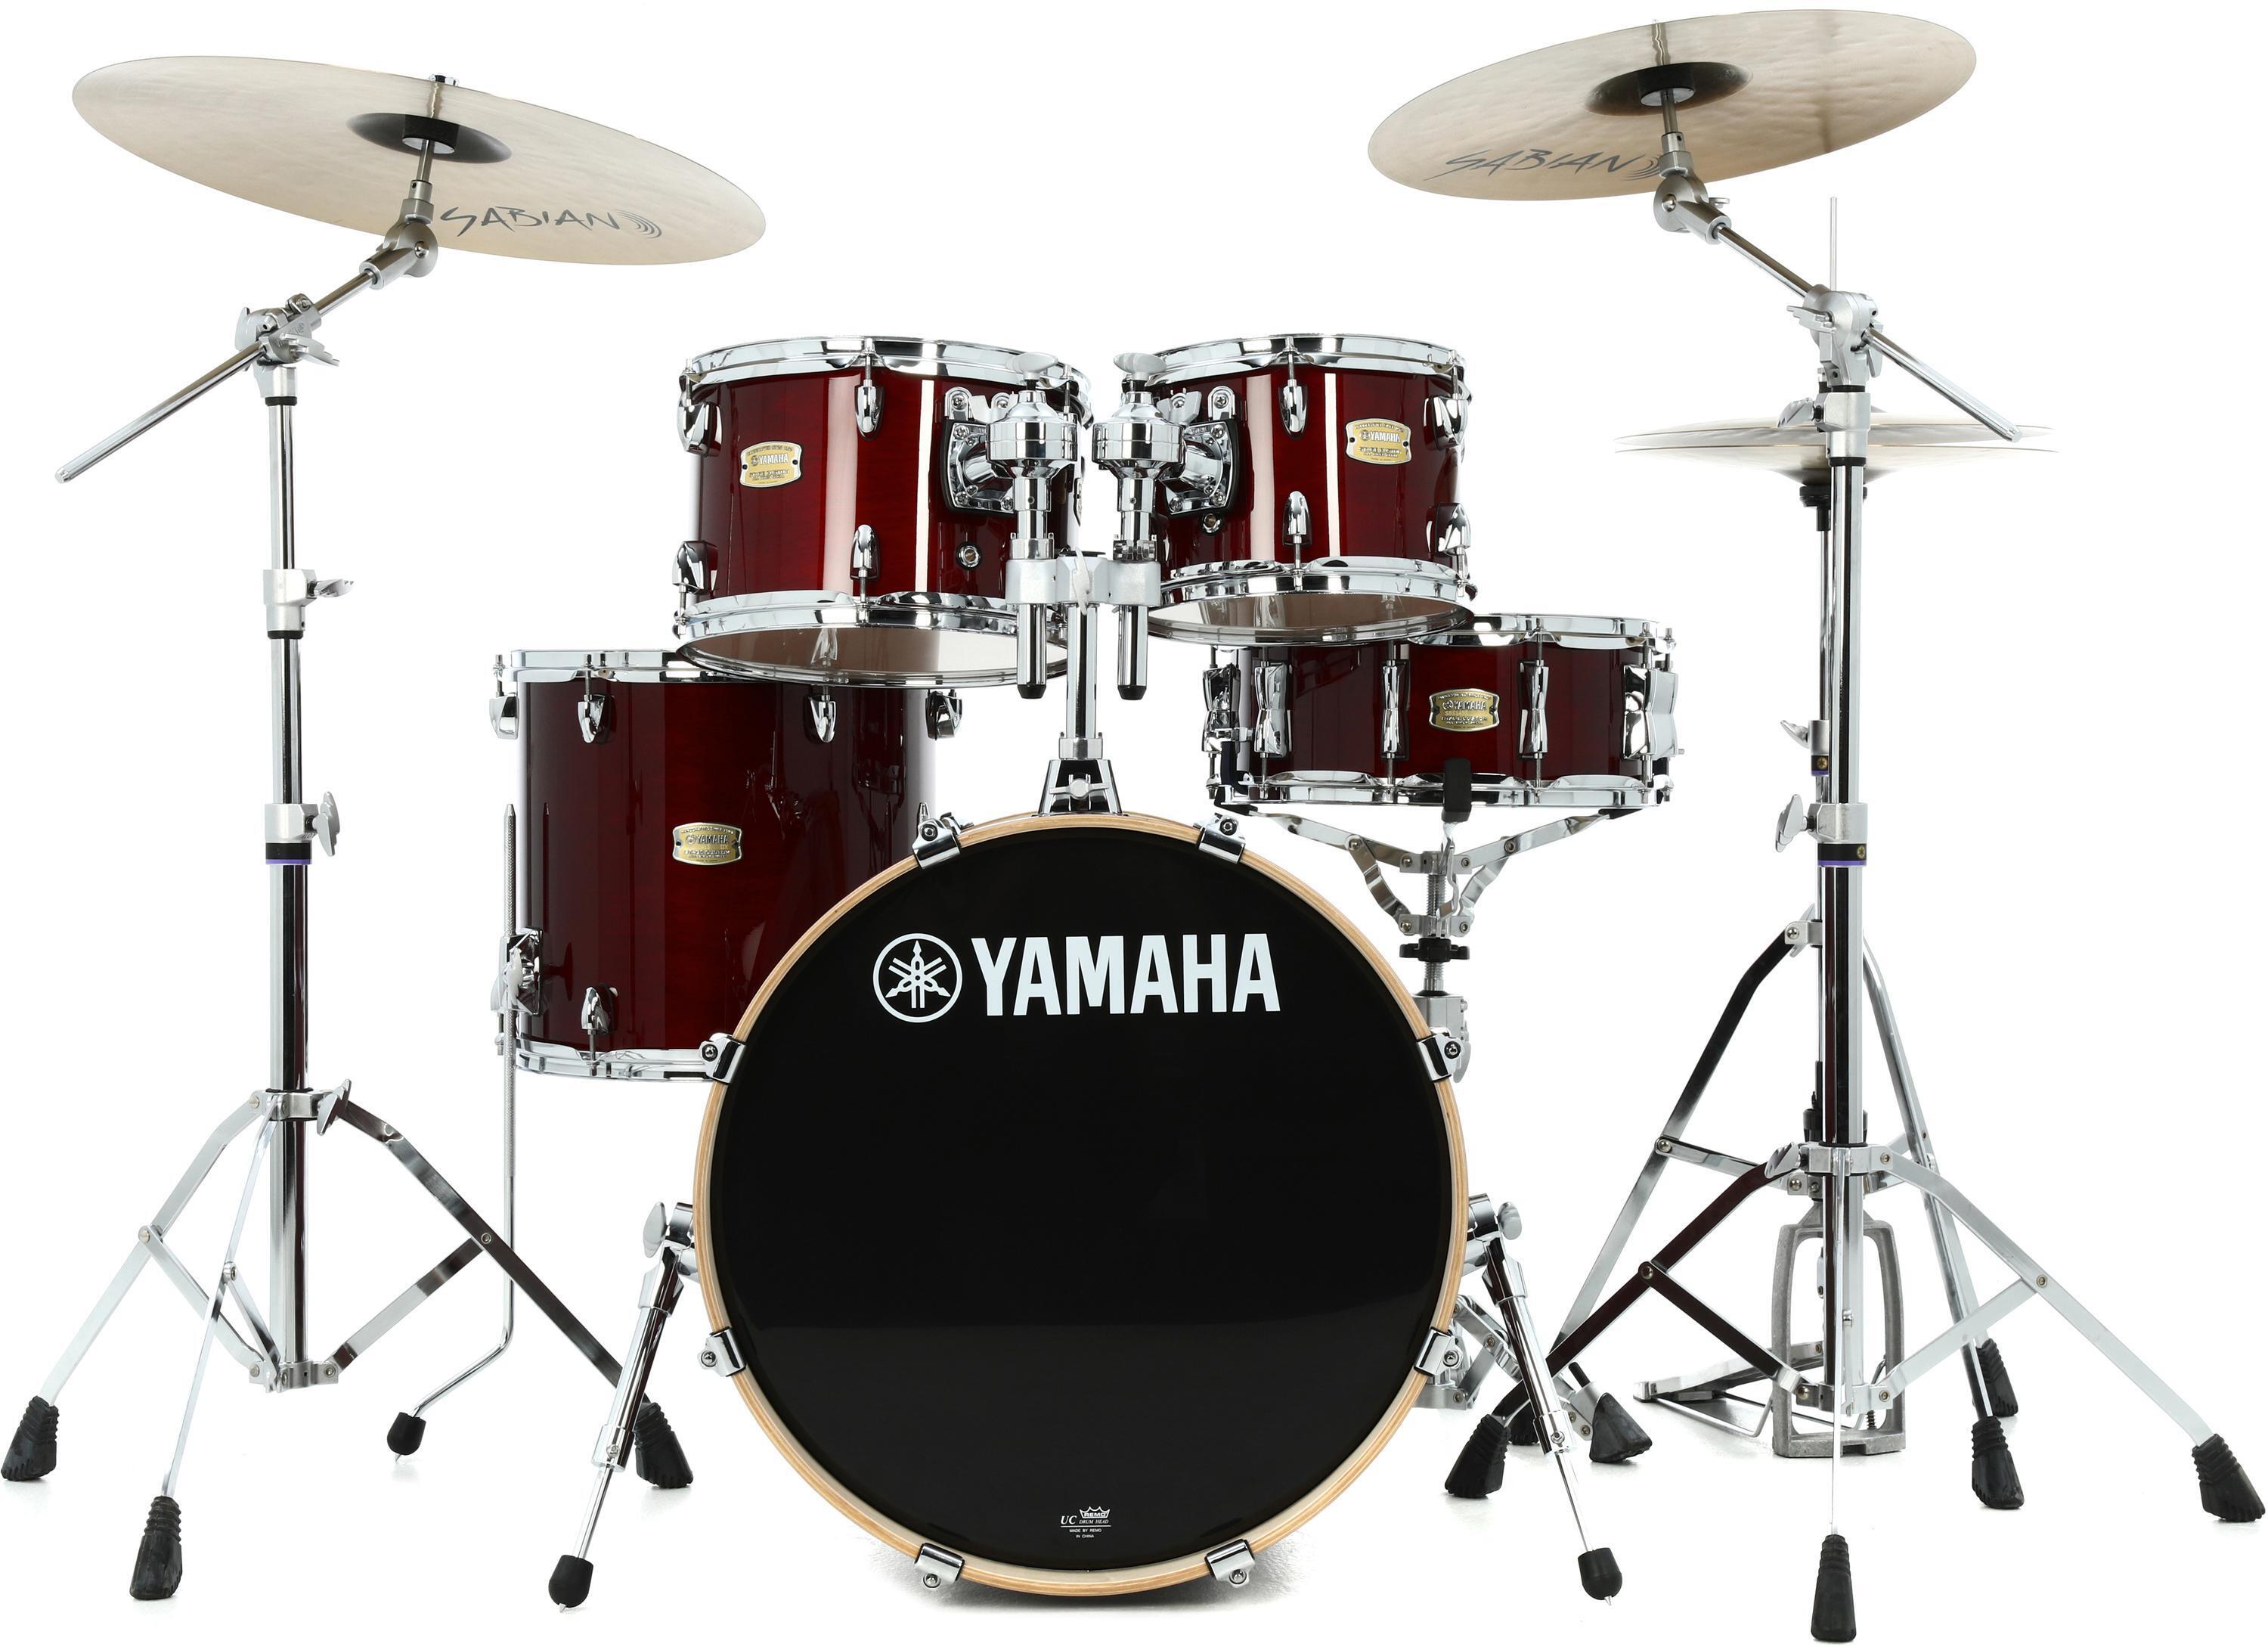 Yamaha SBP0F50 Stage Custom Birch 5-piece Shell Pack - Cranberry Red